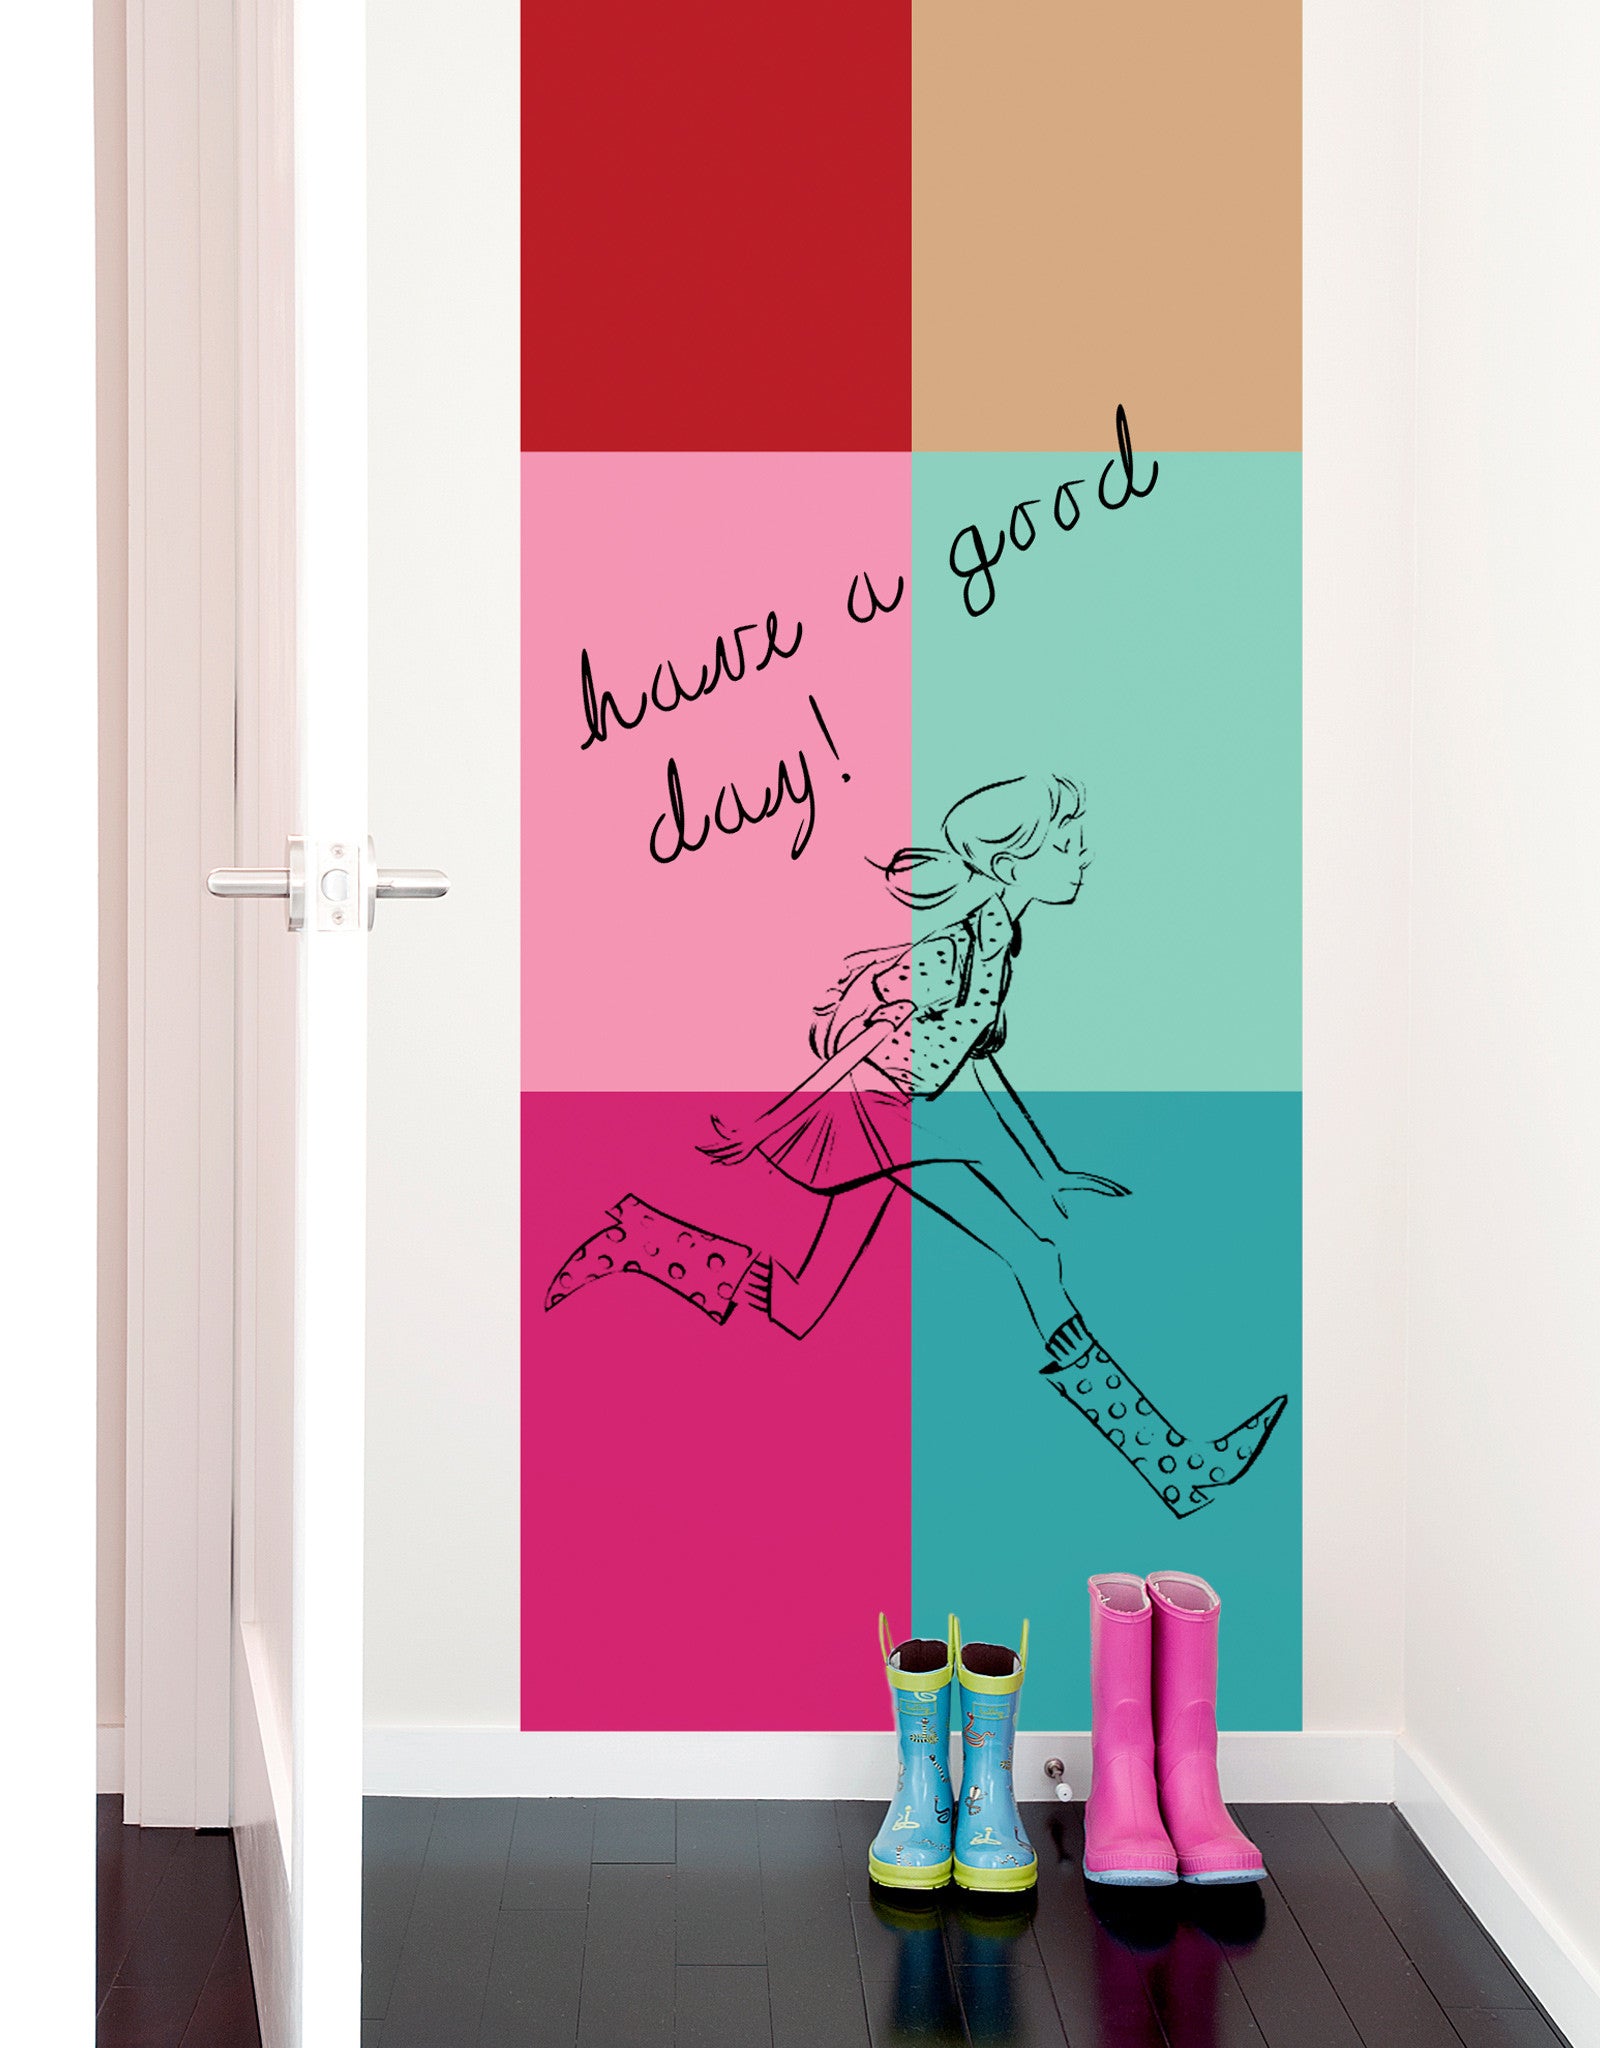 Whiteboard Decal, Dry Erase Wall Decal